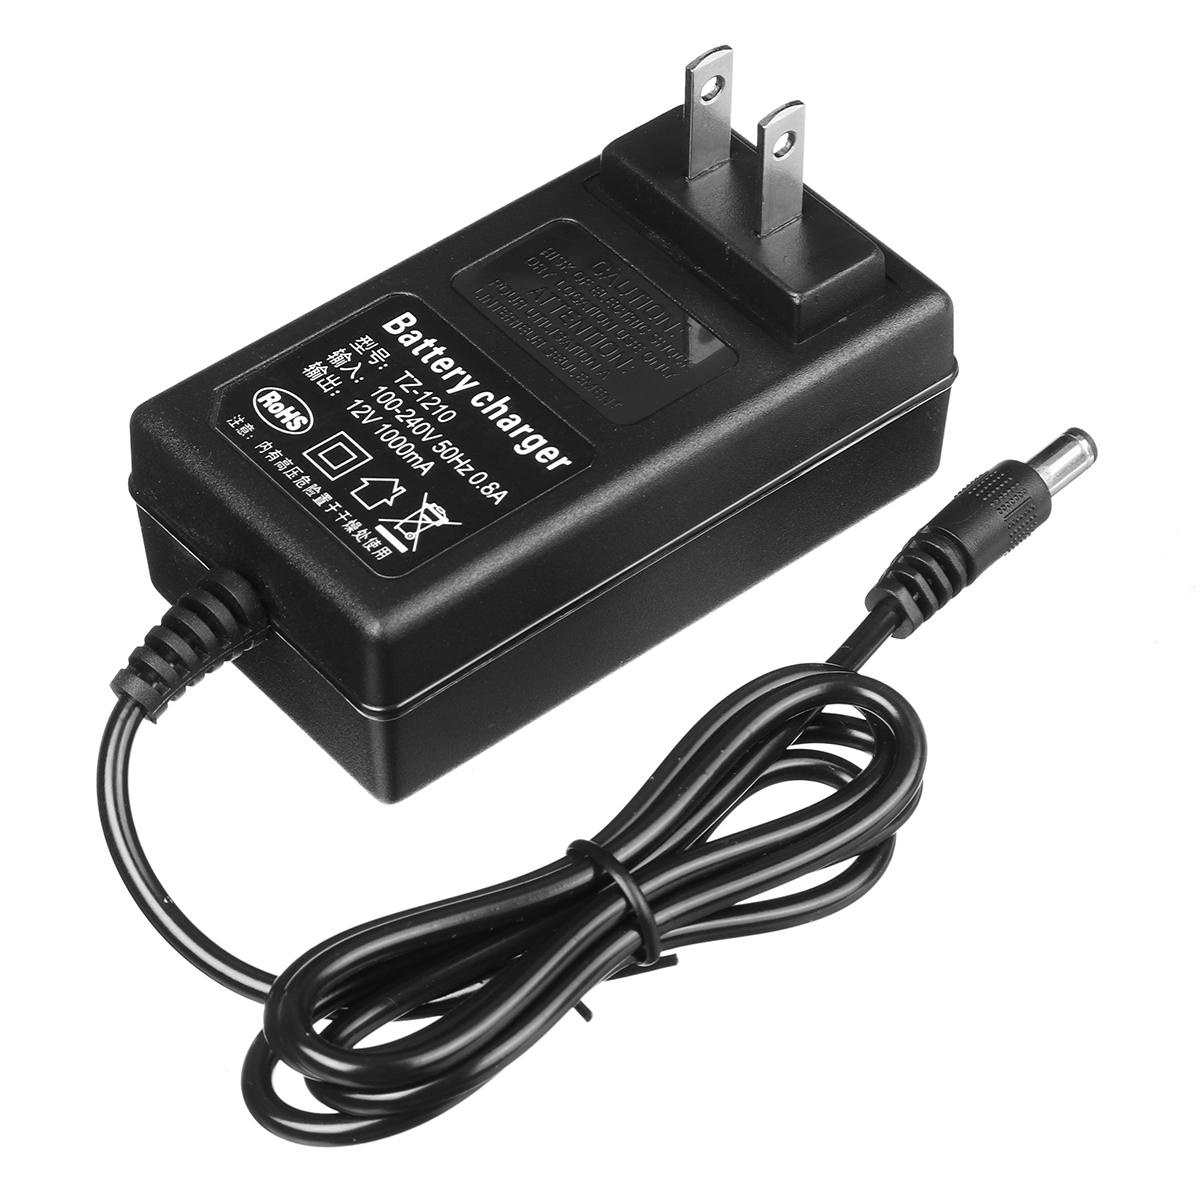 AC-100V-240V-50Hz-06A-Input-12V-1000mAh-Output-Battery-Charger-for-Makita-Electric-Drill-General-Bat-1794719-6